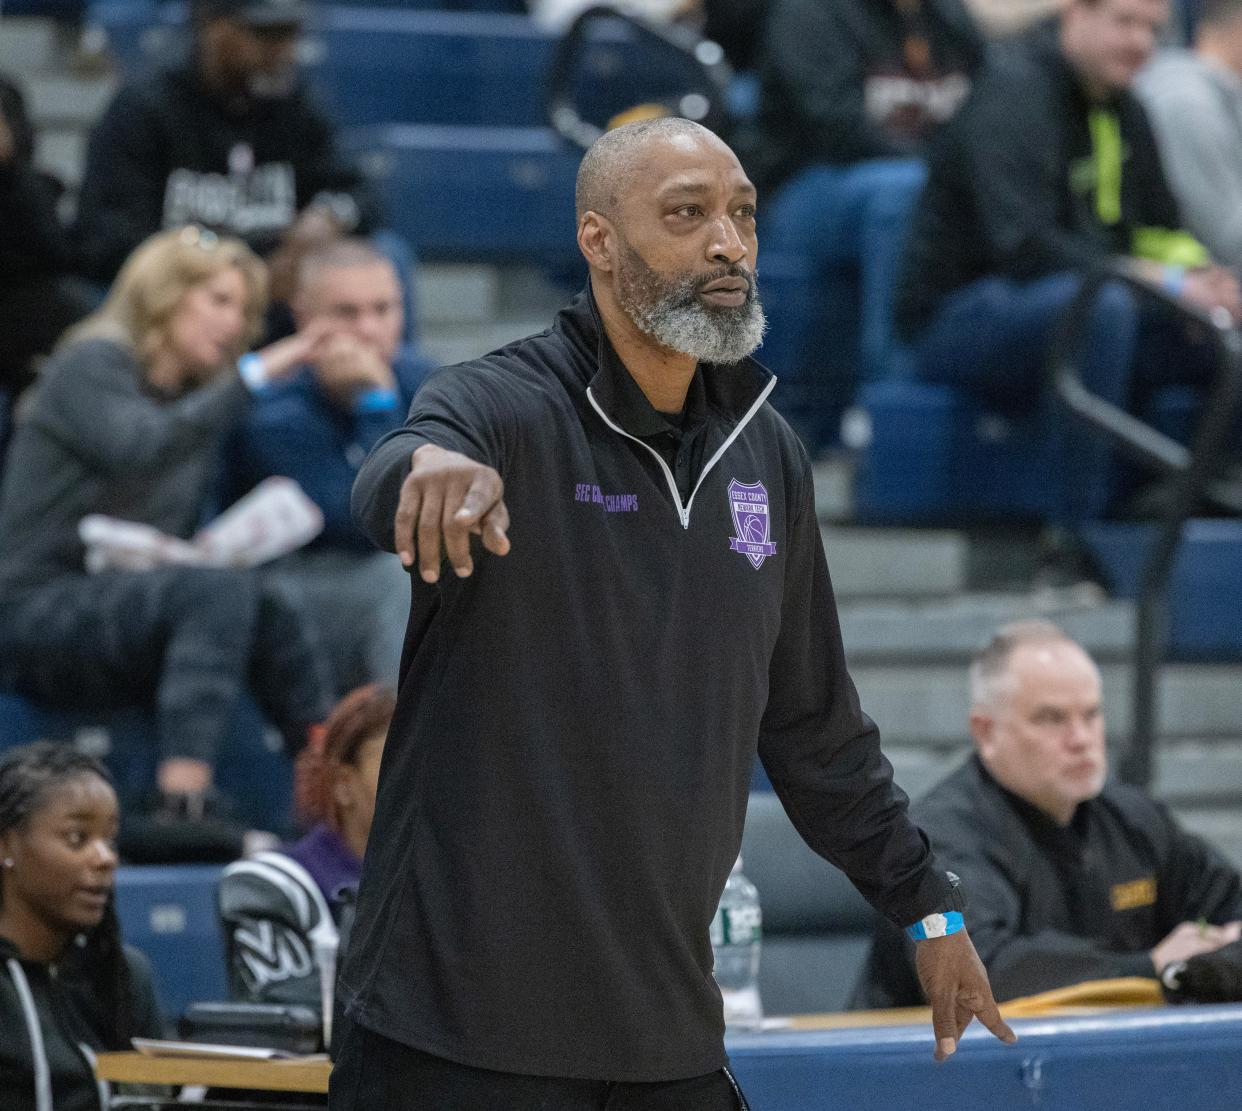 Newark Coach Margues Bragg send in instruction during game. College Achieve Asbury Park vs Newark Tech for NJSIAA Group 1 Title inToms River, NJ on March 10, 2024.